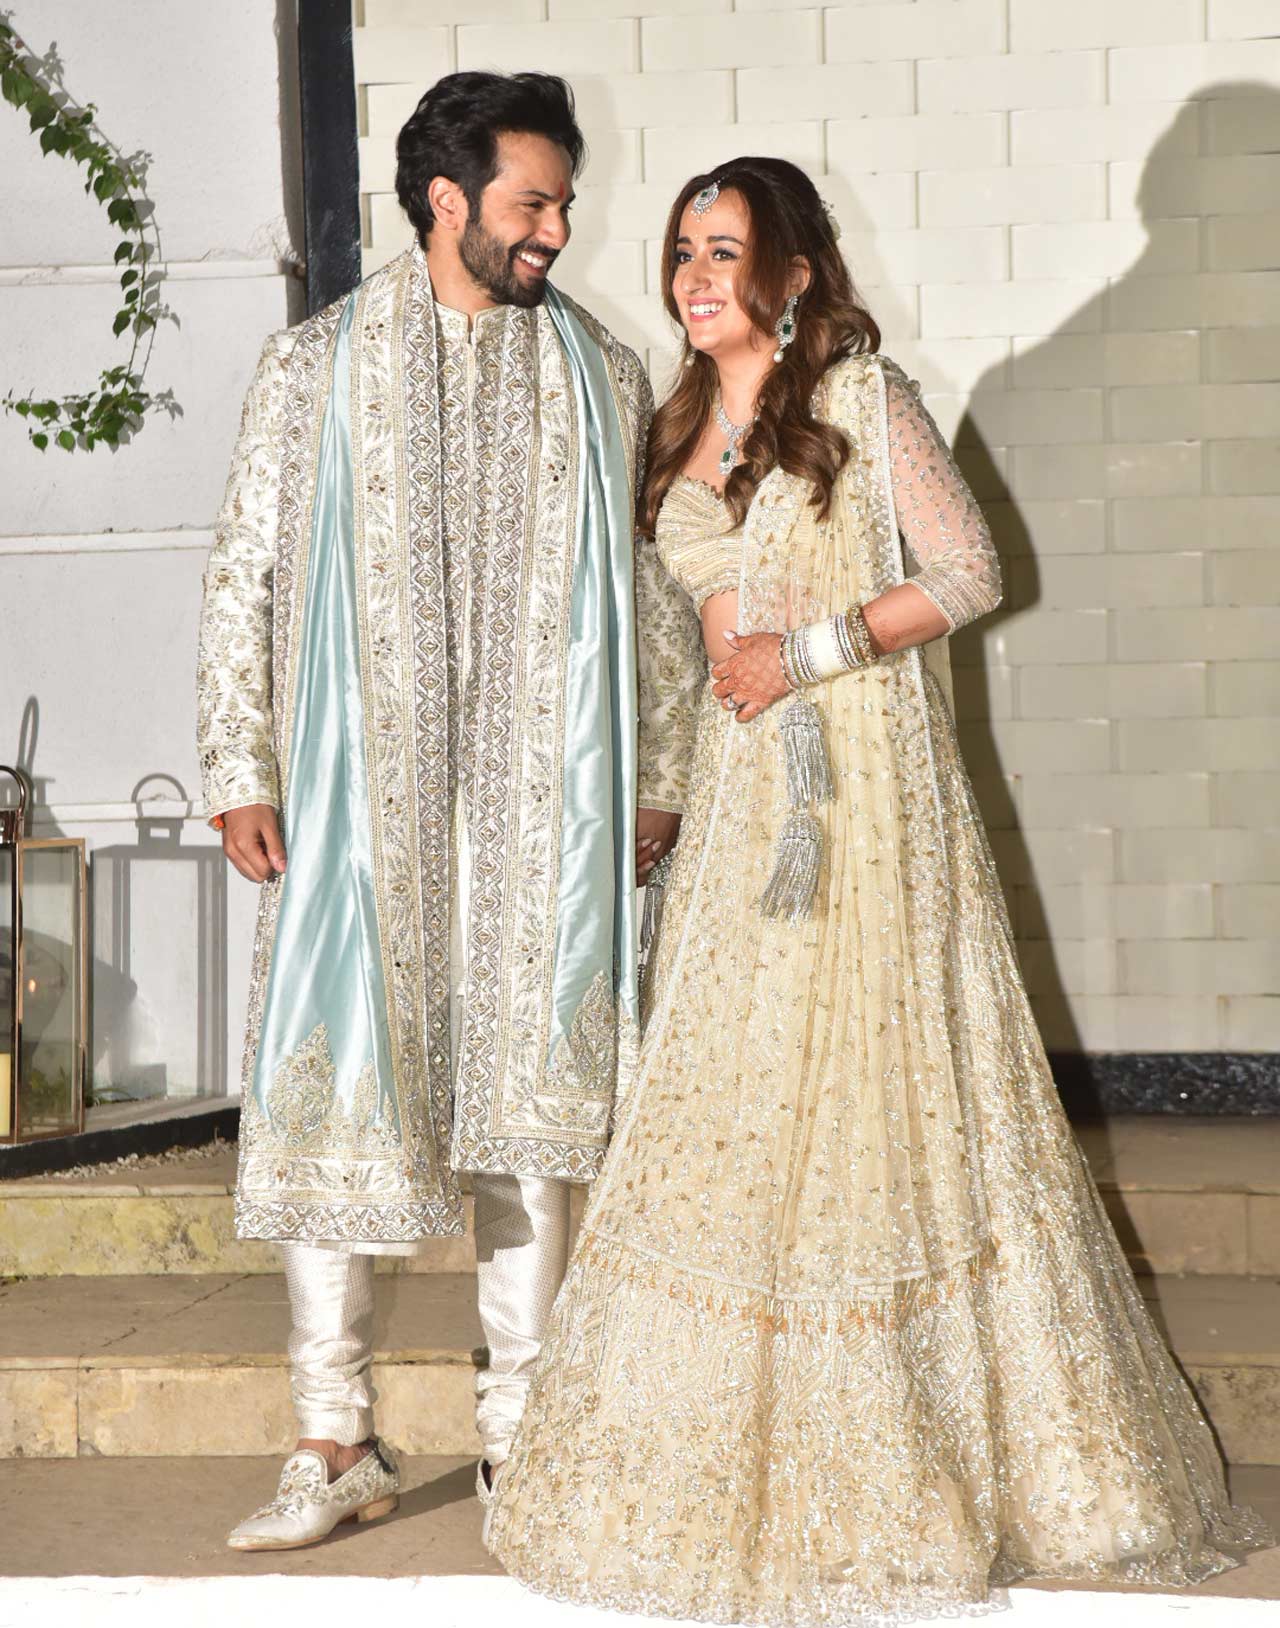 It was a COVID-19 wedding for Varun Dhawan and Natasha Dalal, who tied the knot in an intimate ceremony at Alibaug's The Mansion House Resort.